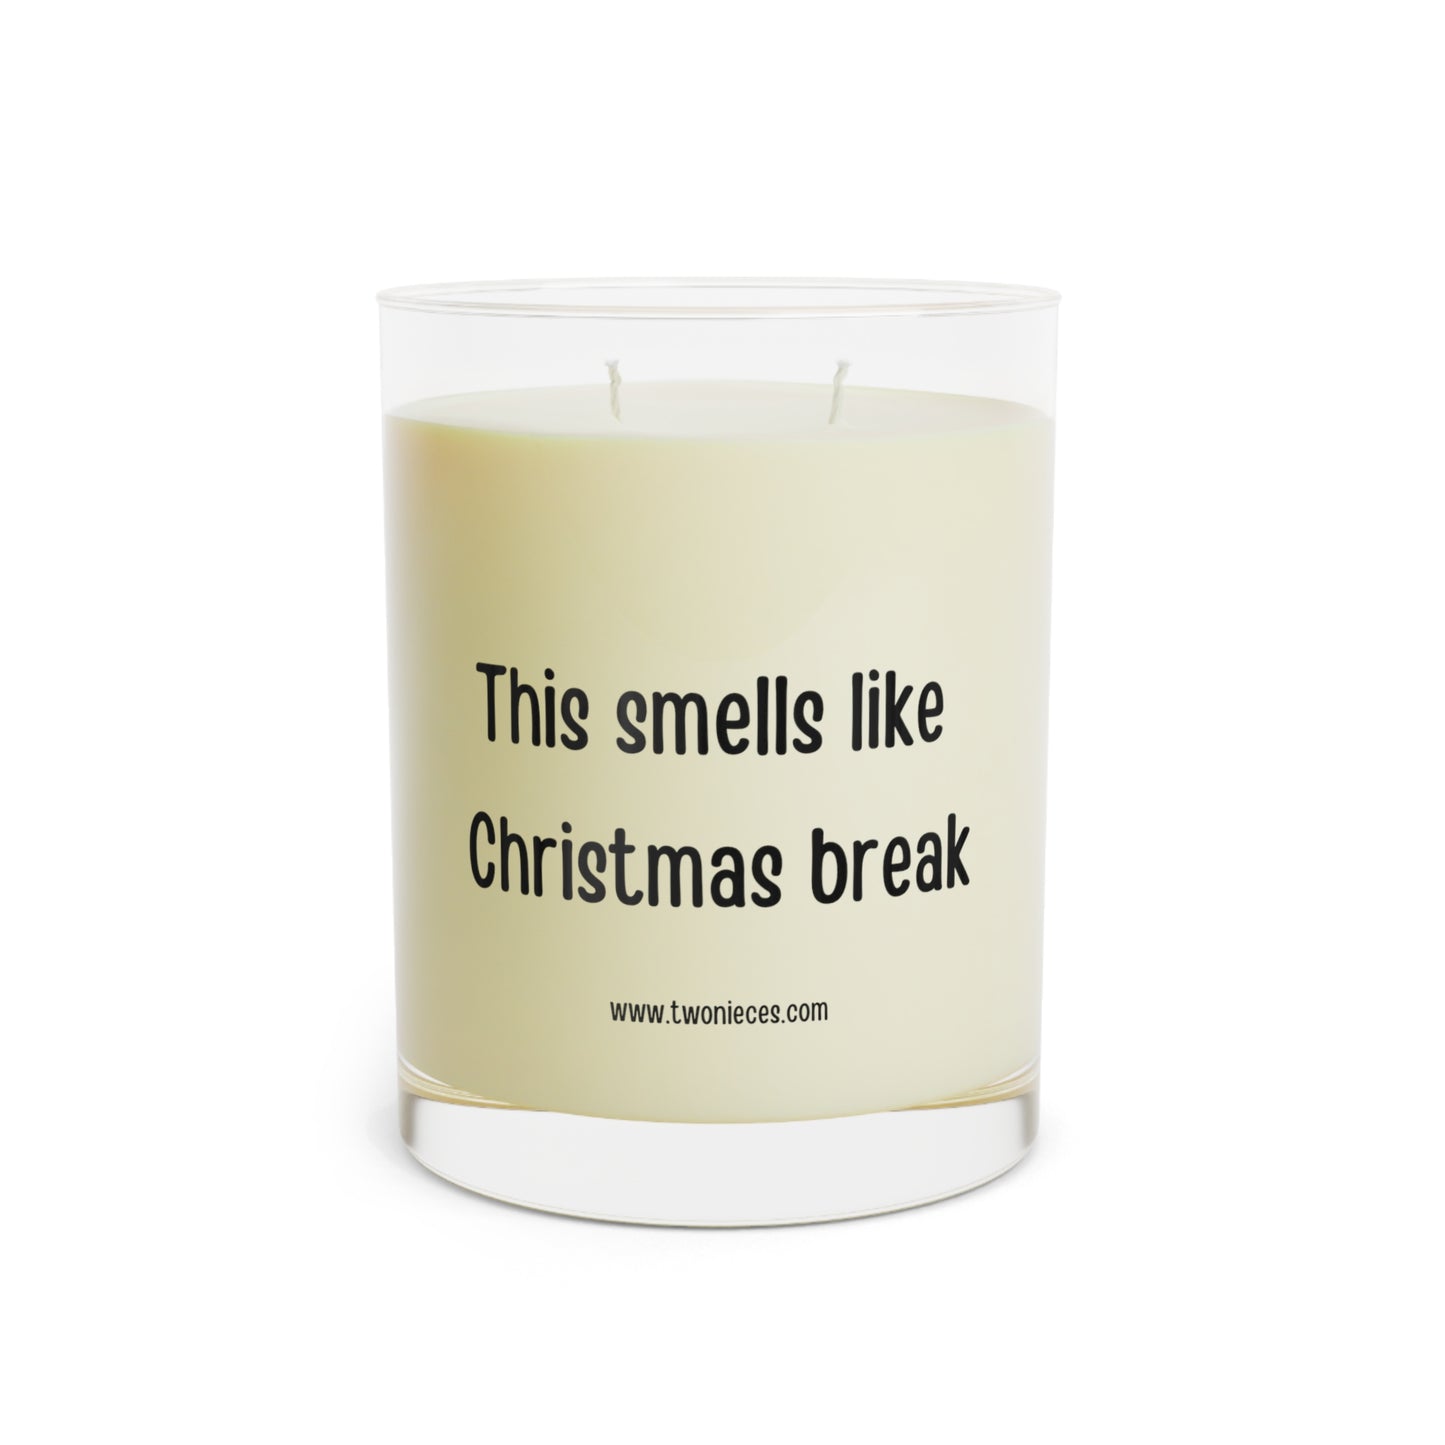 This smells like Christmas break Scented Candle - Full Glass, 11oz